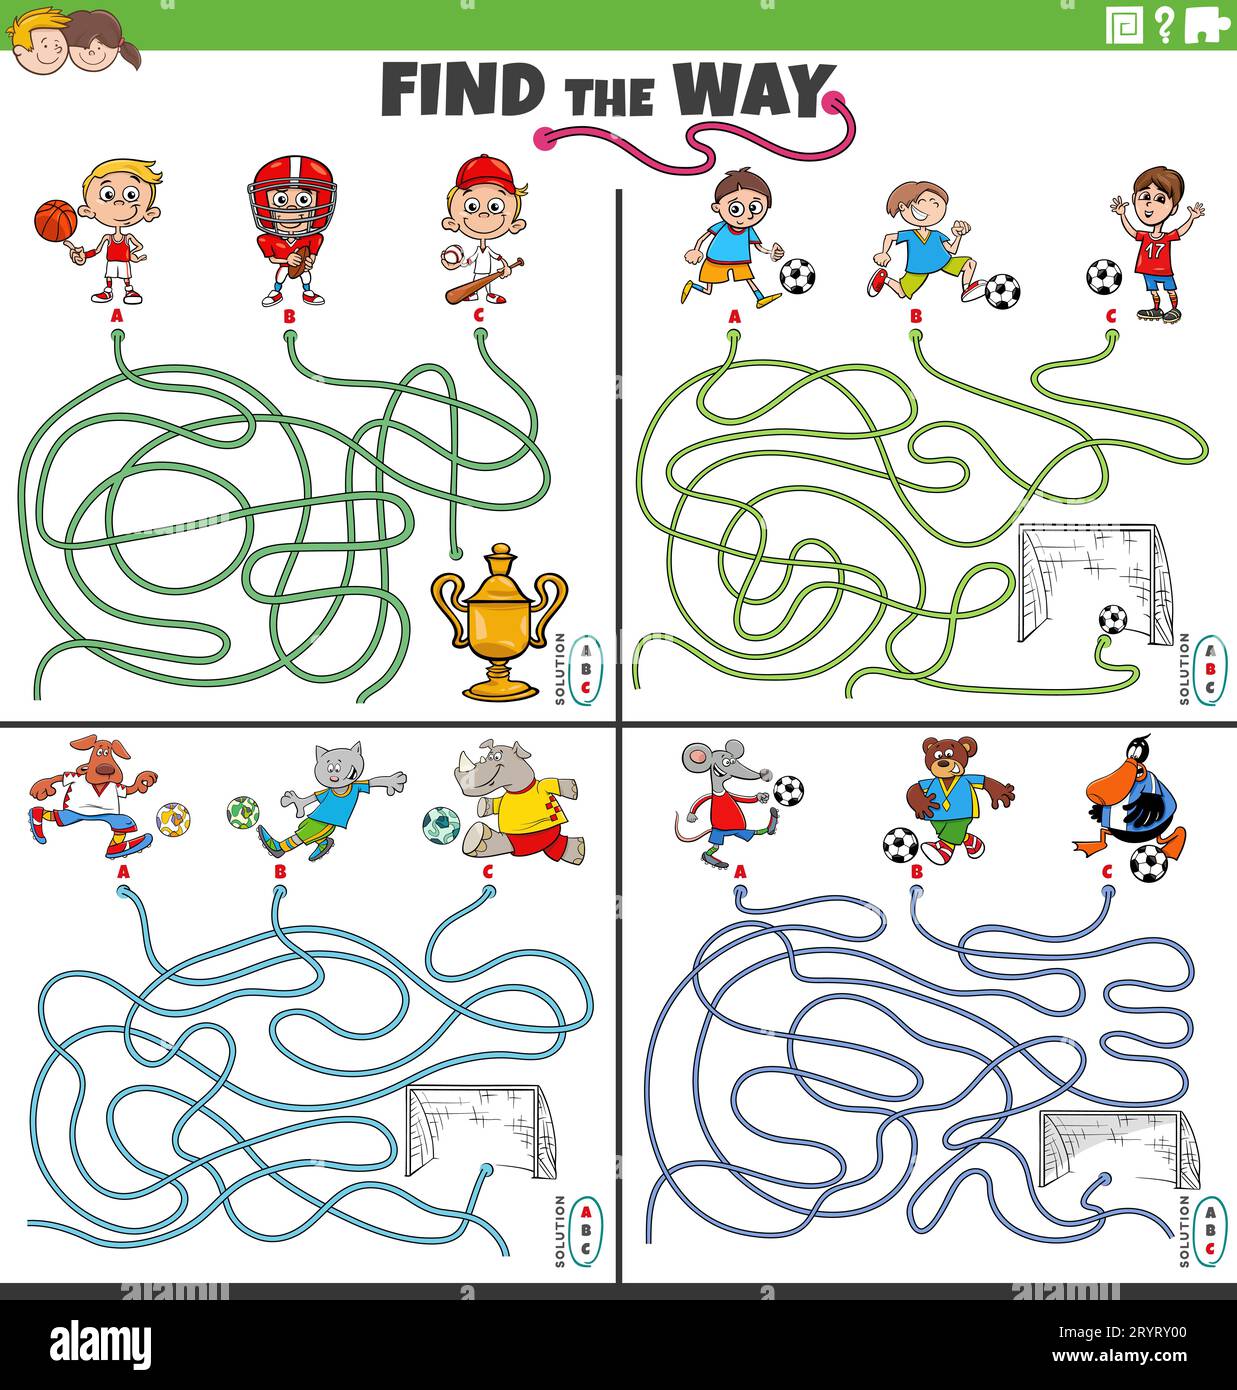 Cartoon illustration of find the way maze puzzle activities set with children and animal characters playing sport games Stock Photo